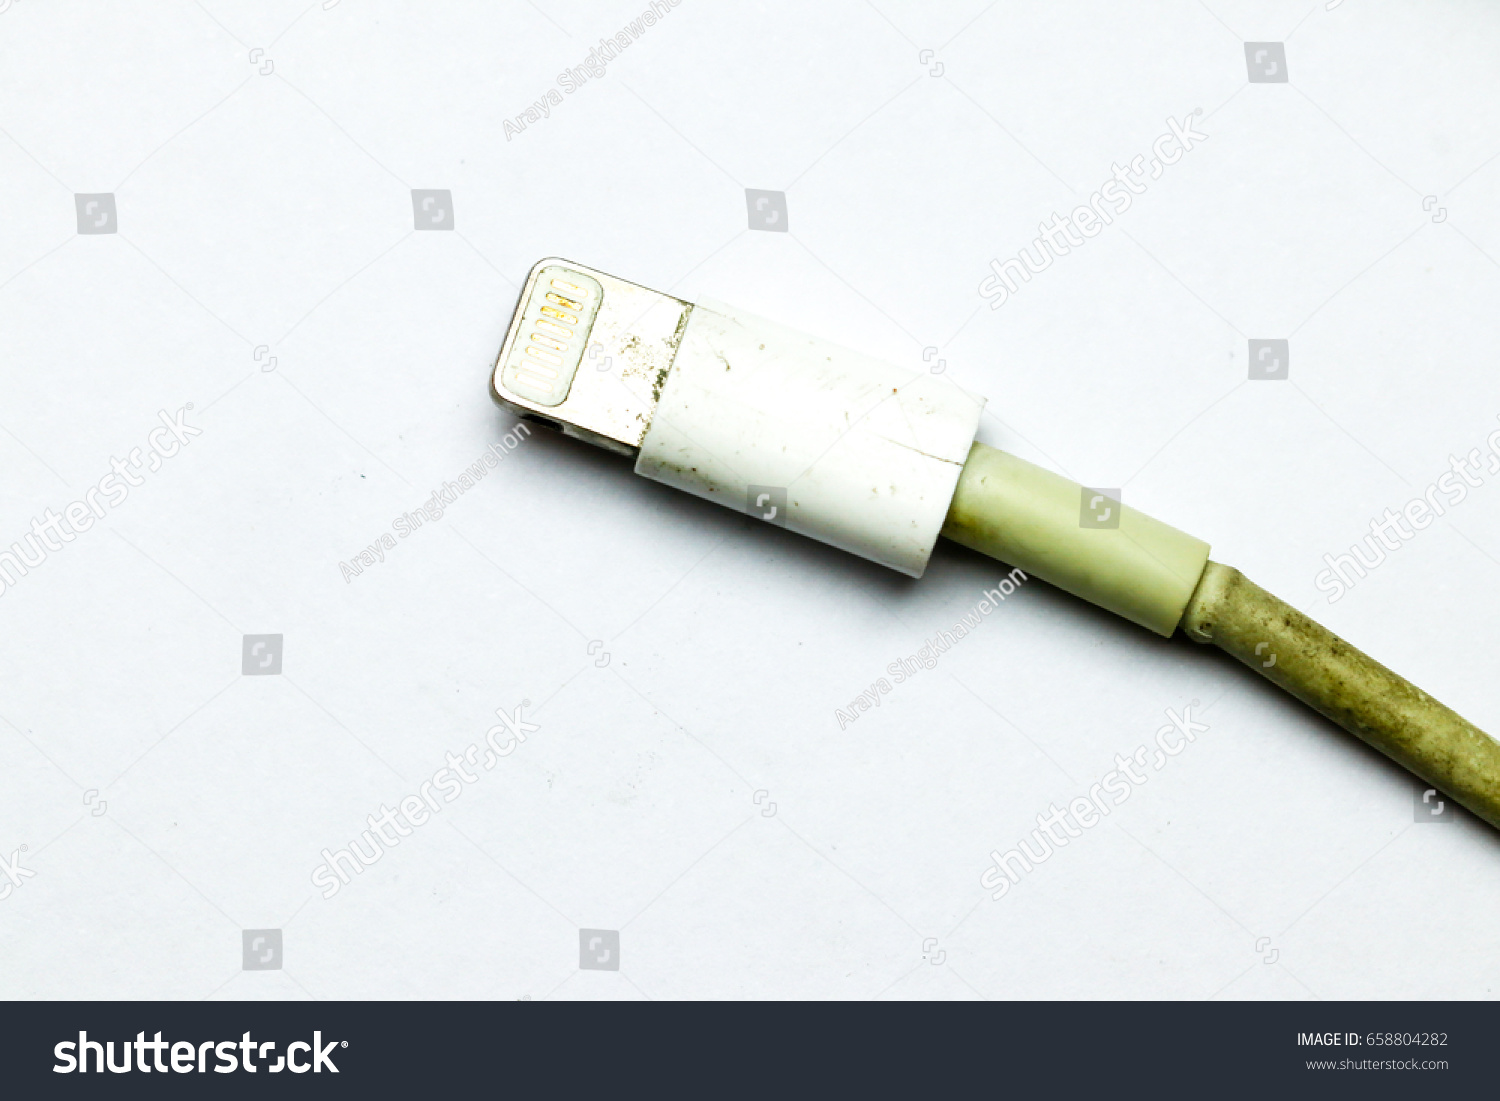 Cable, USB Cable #658804282